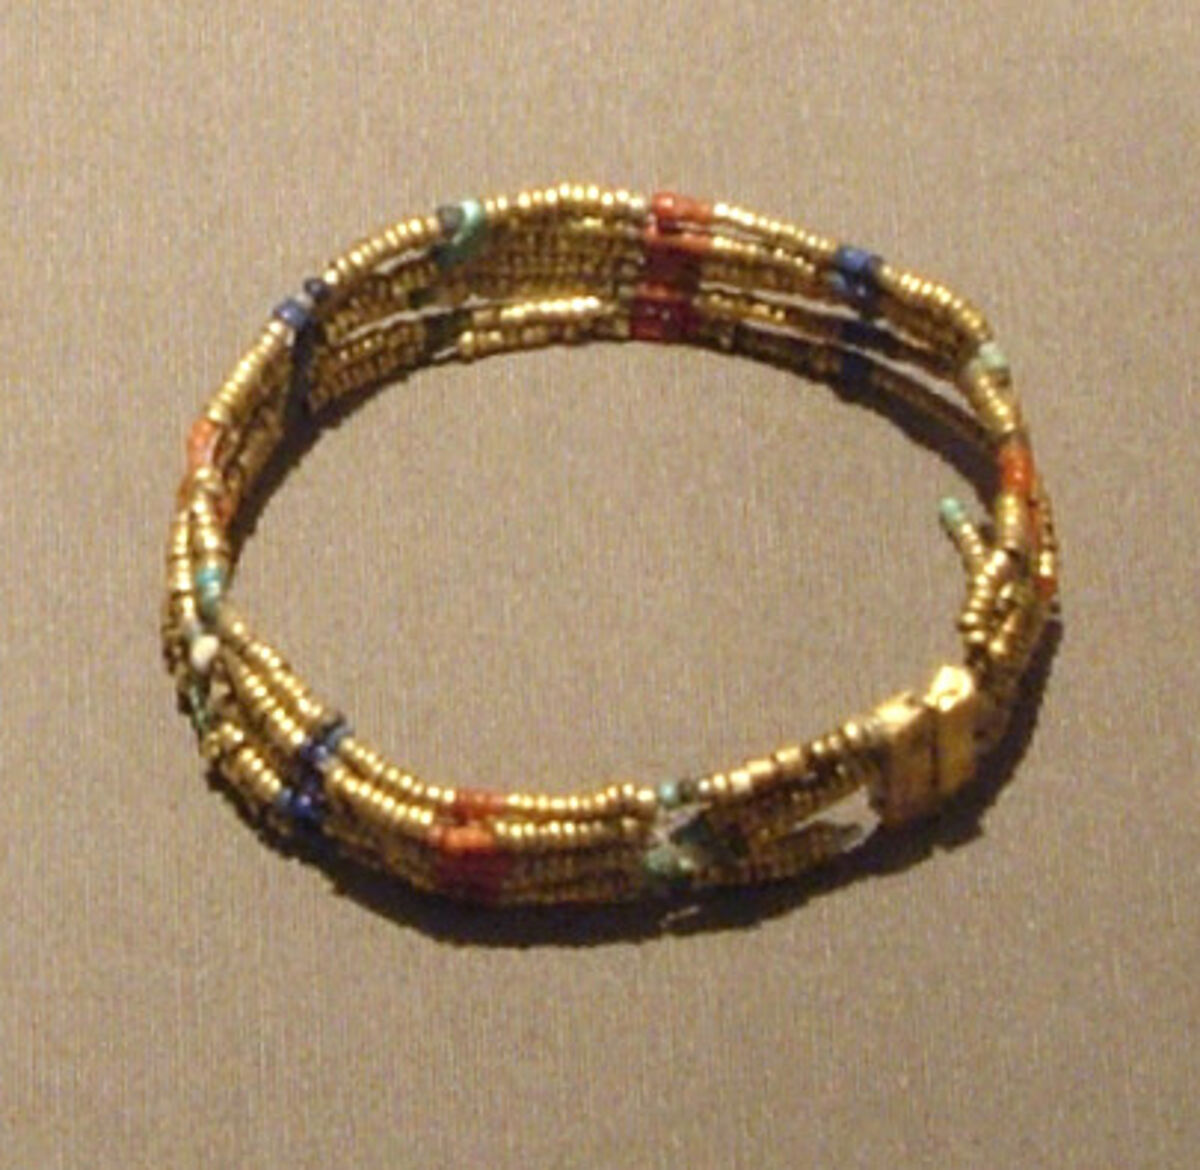 Beaded Armlet, Gold, carnelian, lapis lazuli, blue and green glass, faience on bronze or copper wire 